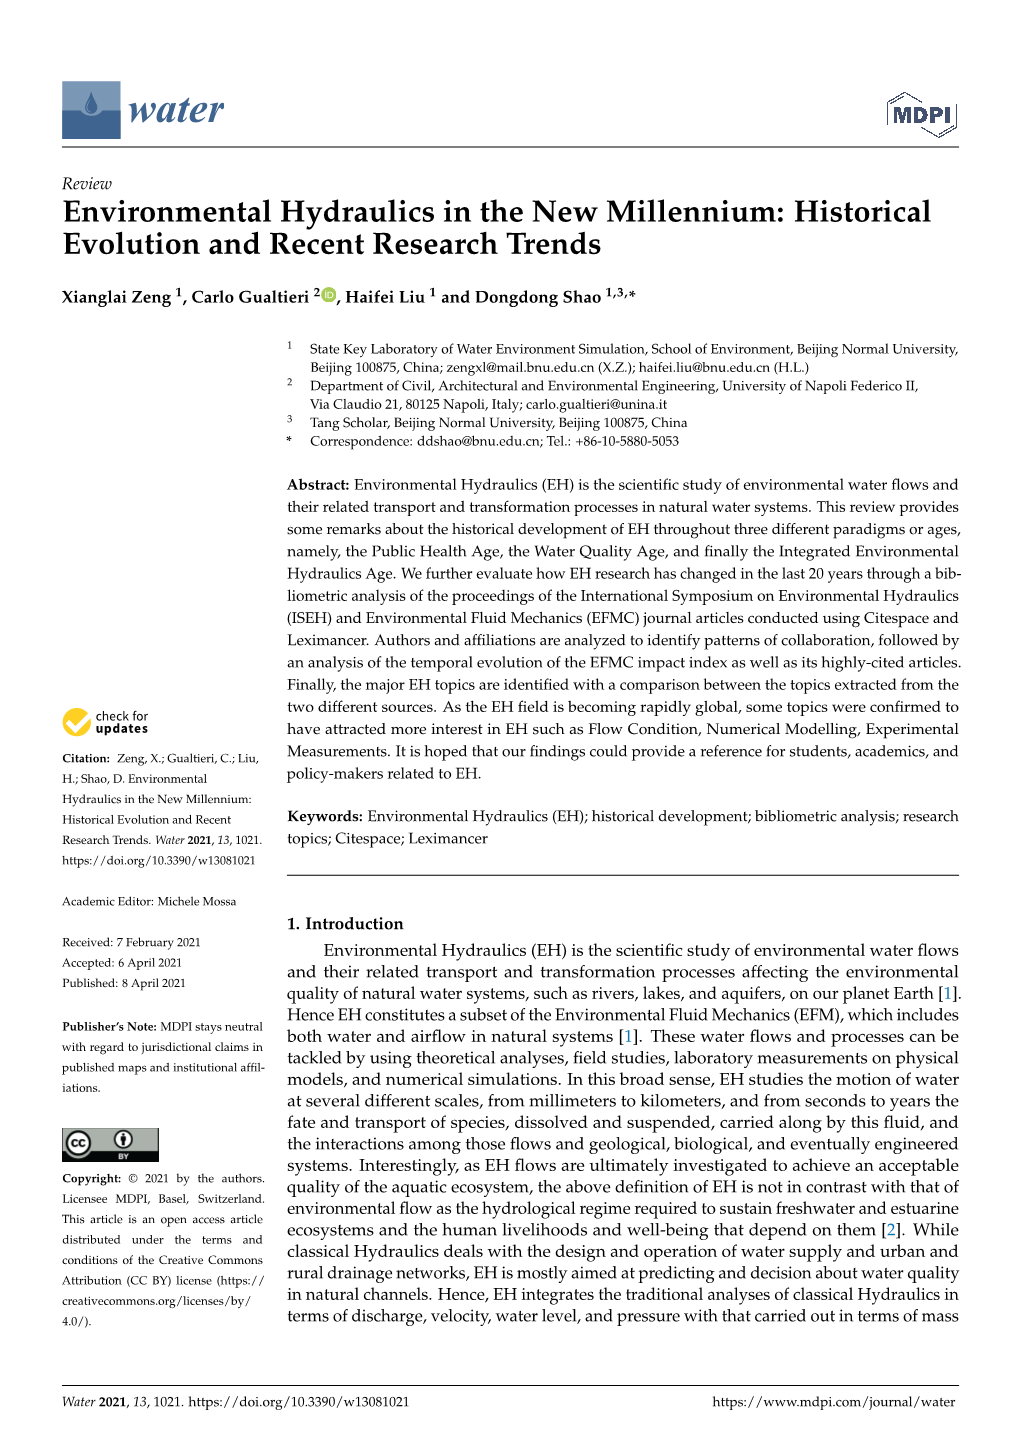 Environmental Hydraulics in the New Millennium: Historical Evolution and Recent Research Trends